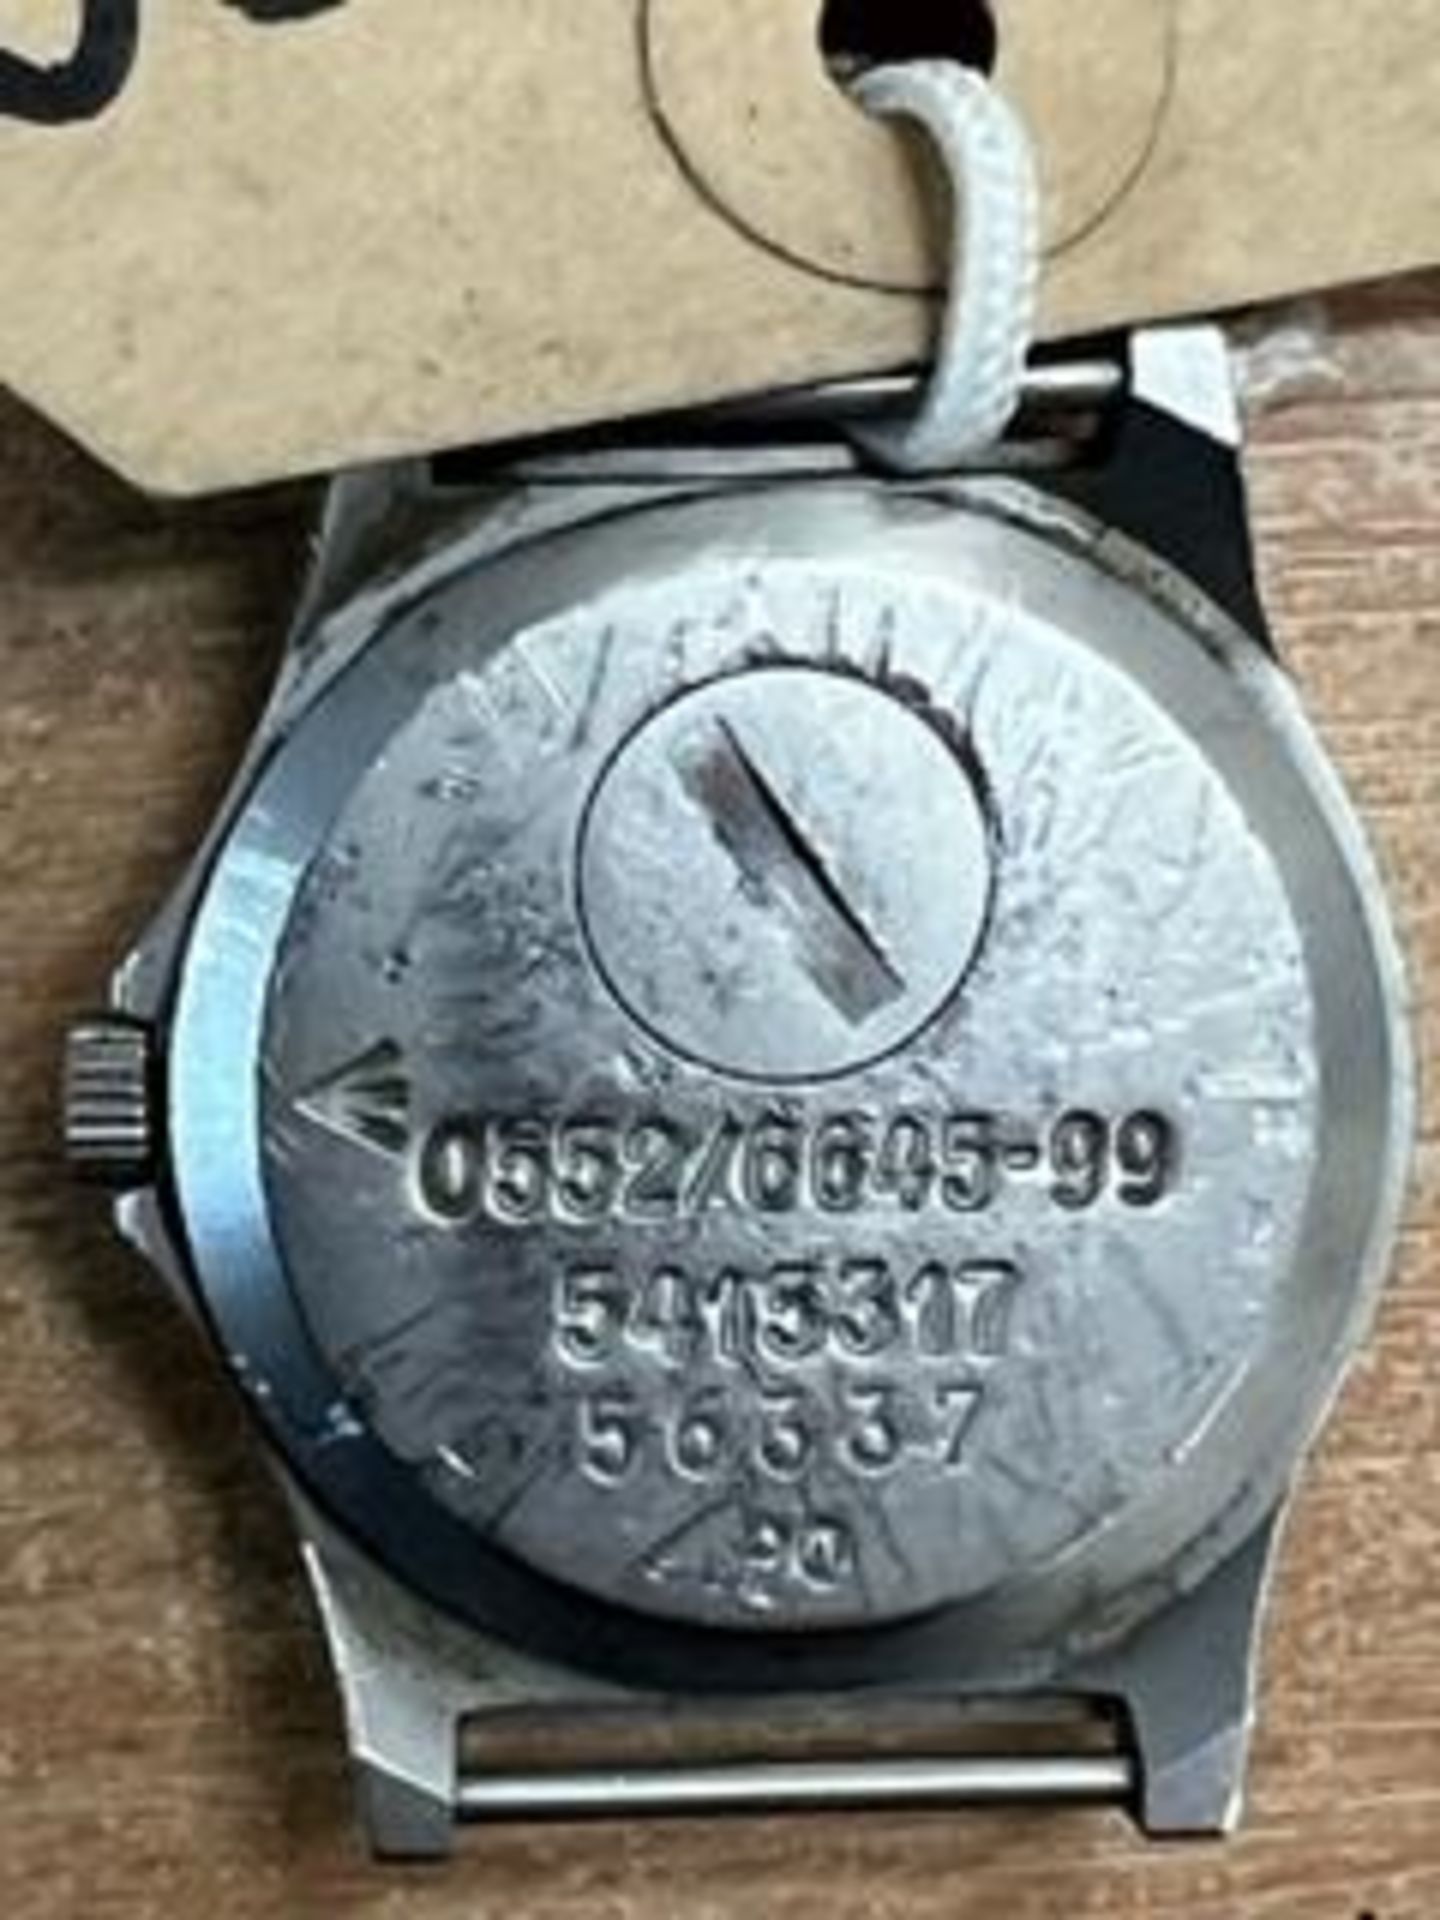 CWC 0552 ROYAL MARINES SERVICE WATCH NATO MARKS DATE 1990 ** GULF WAR** - Image 6 of 9